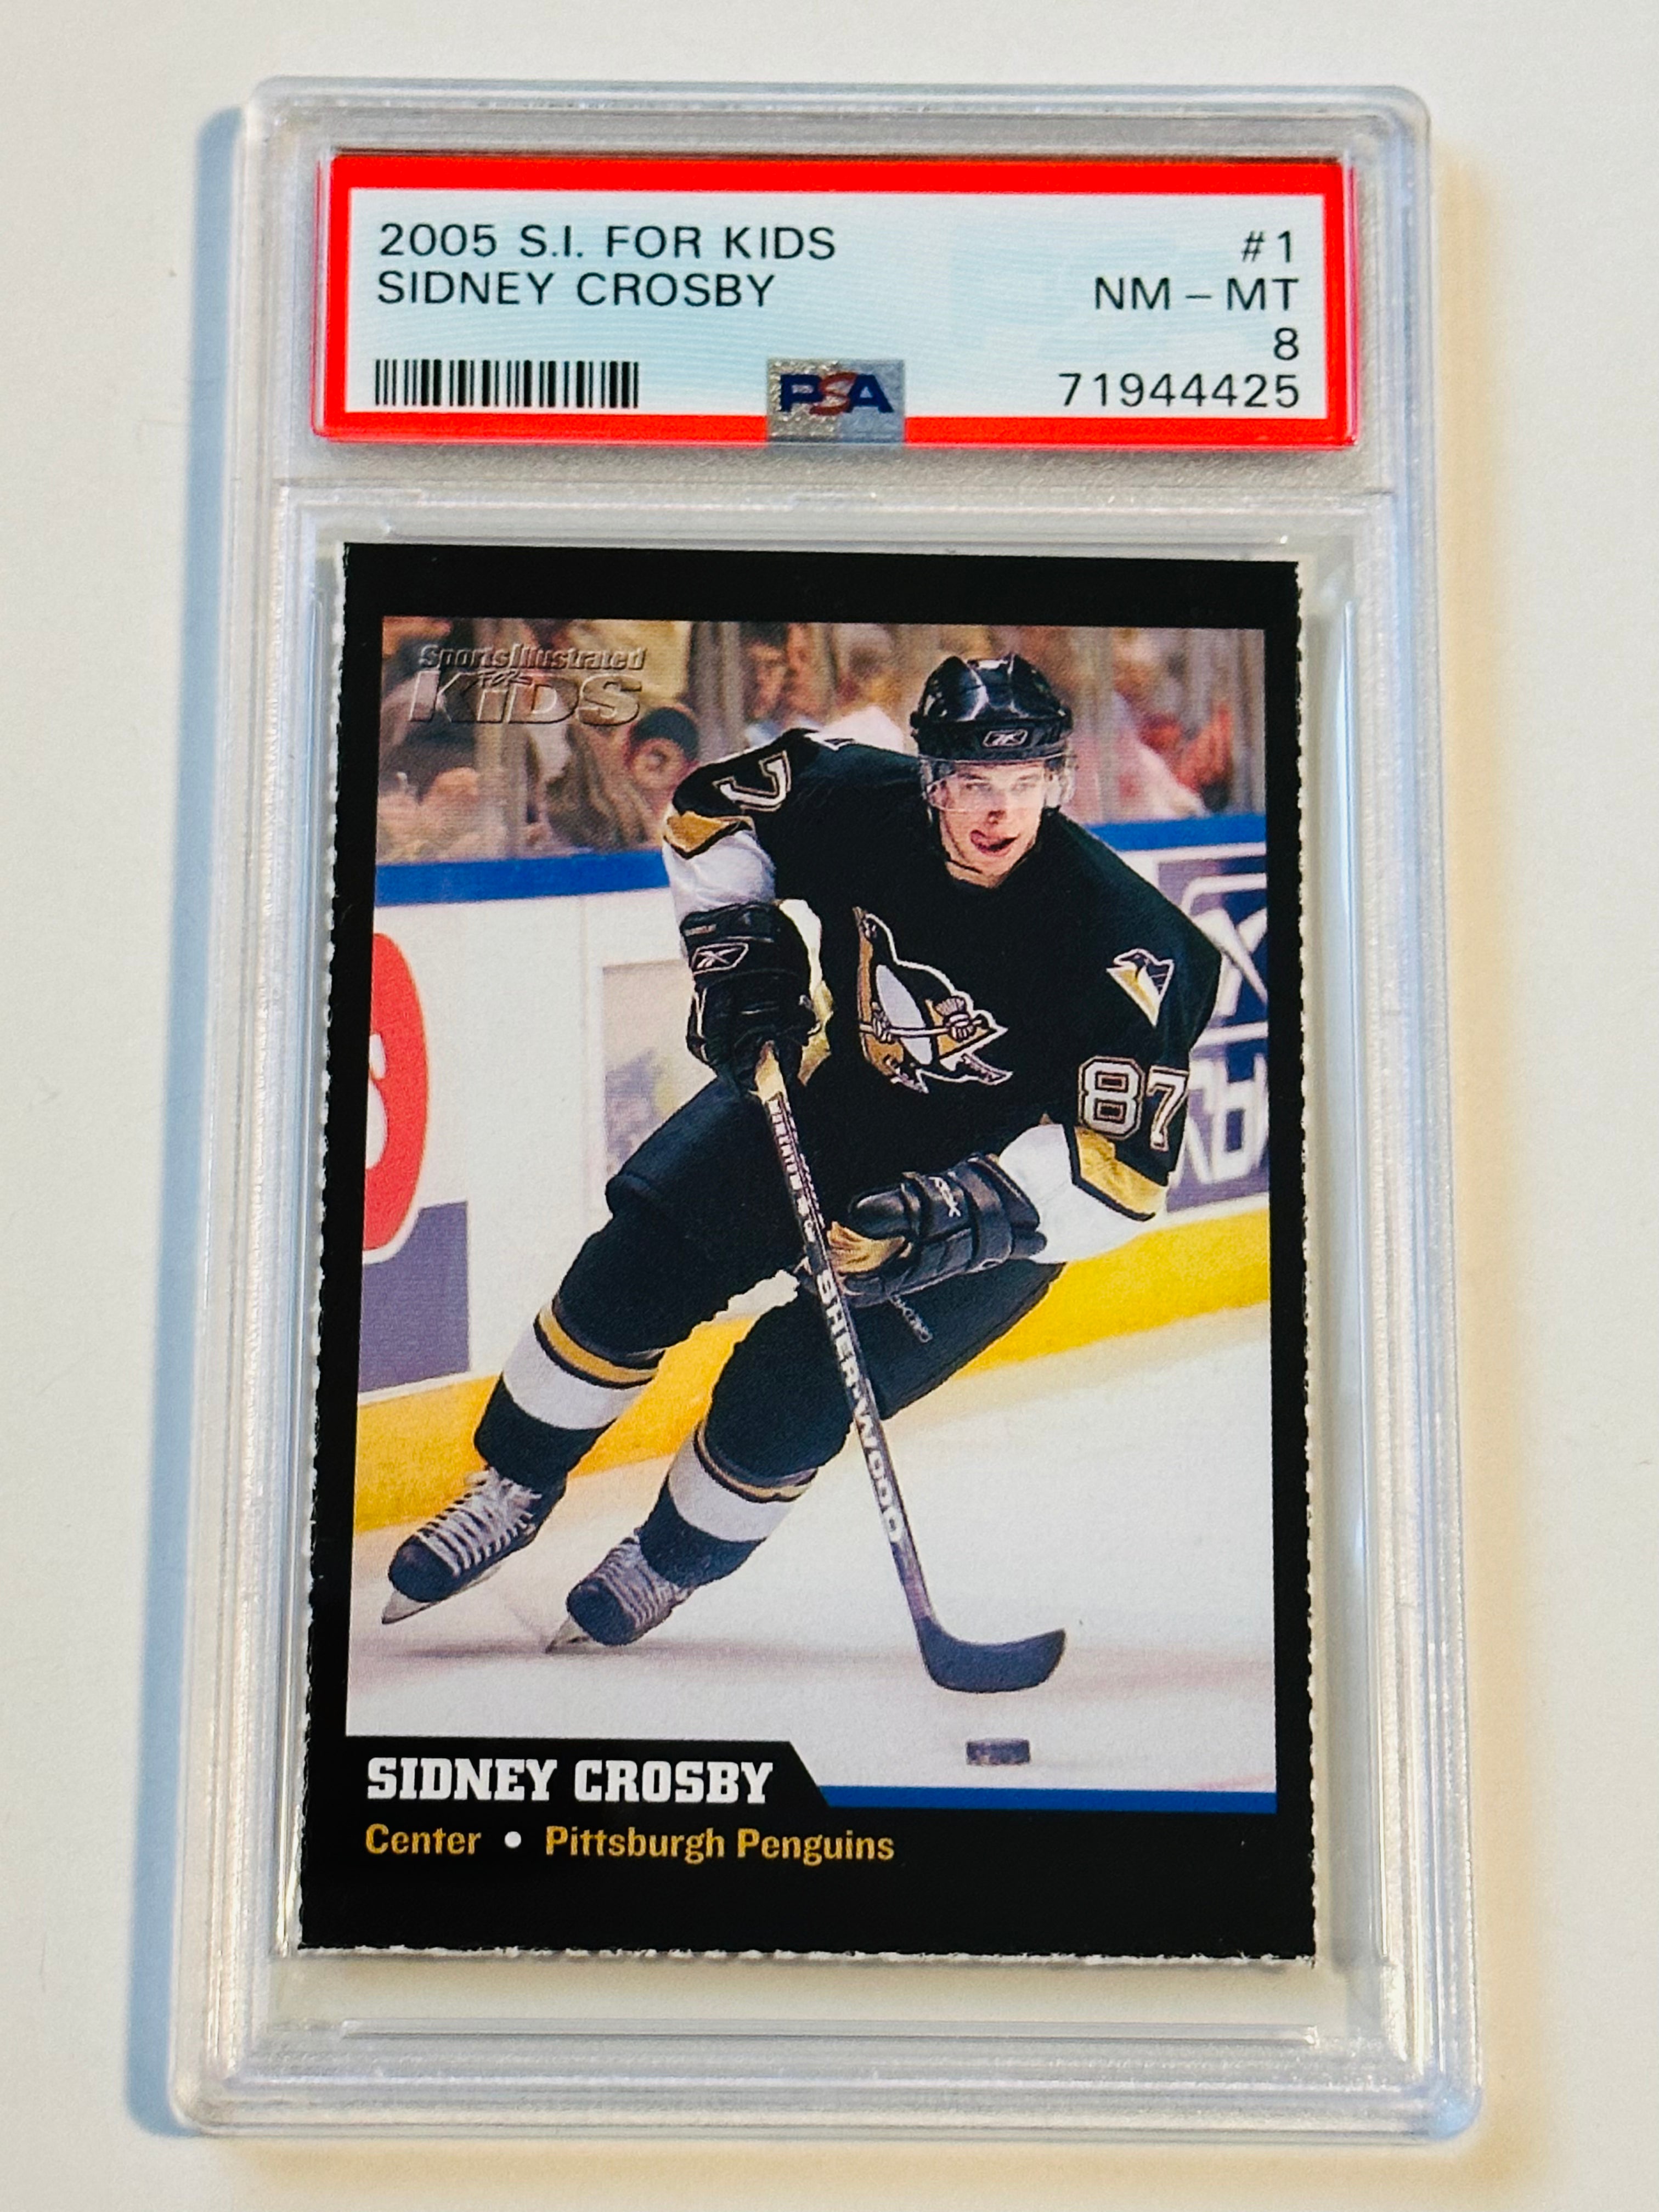 Sidney Crosby SI sports illustrated for kids rare hockey rookie card PSA8 graded 2005